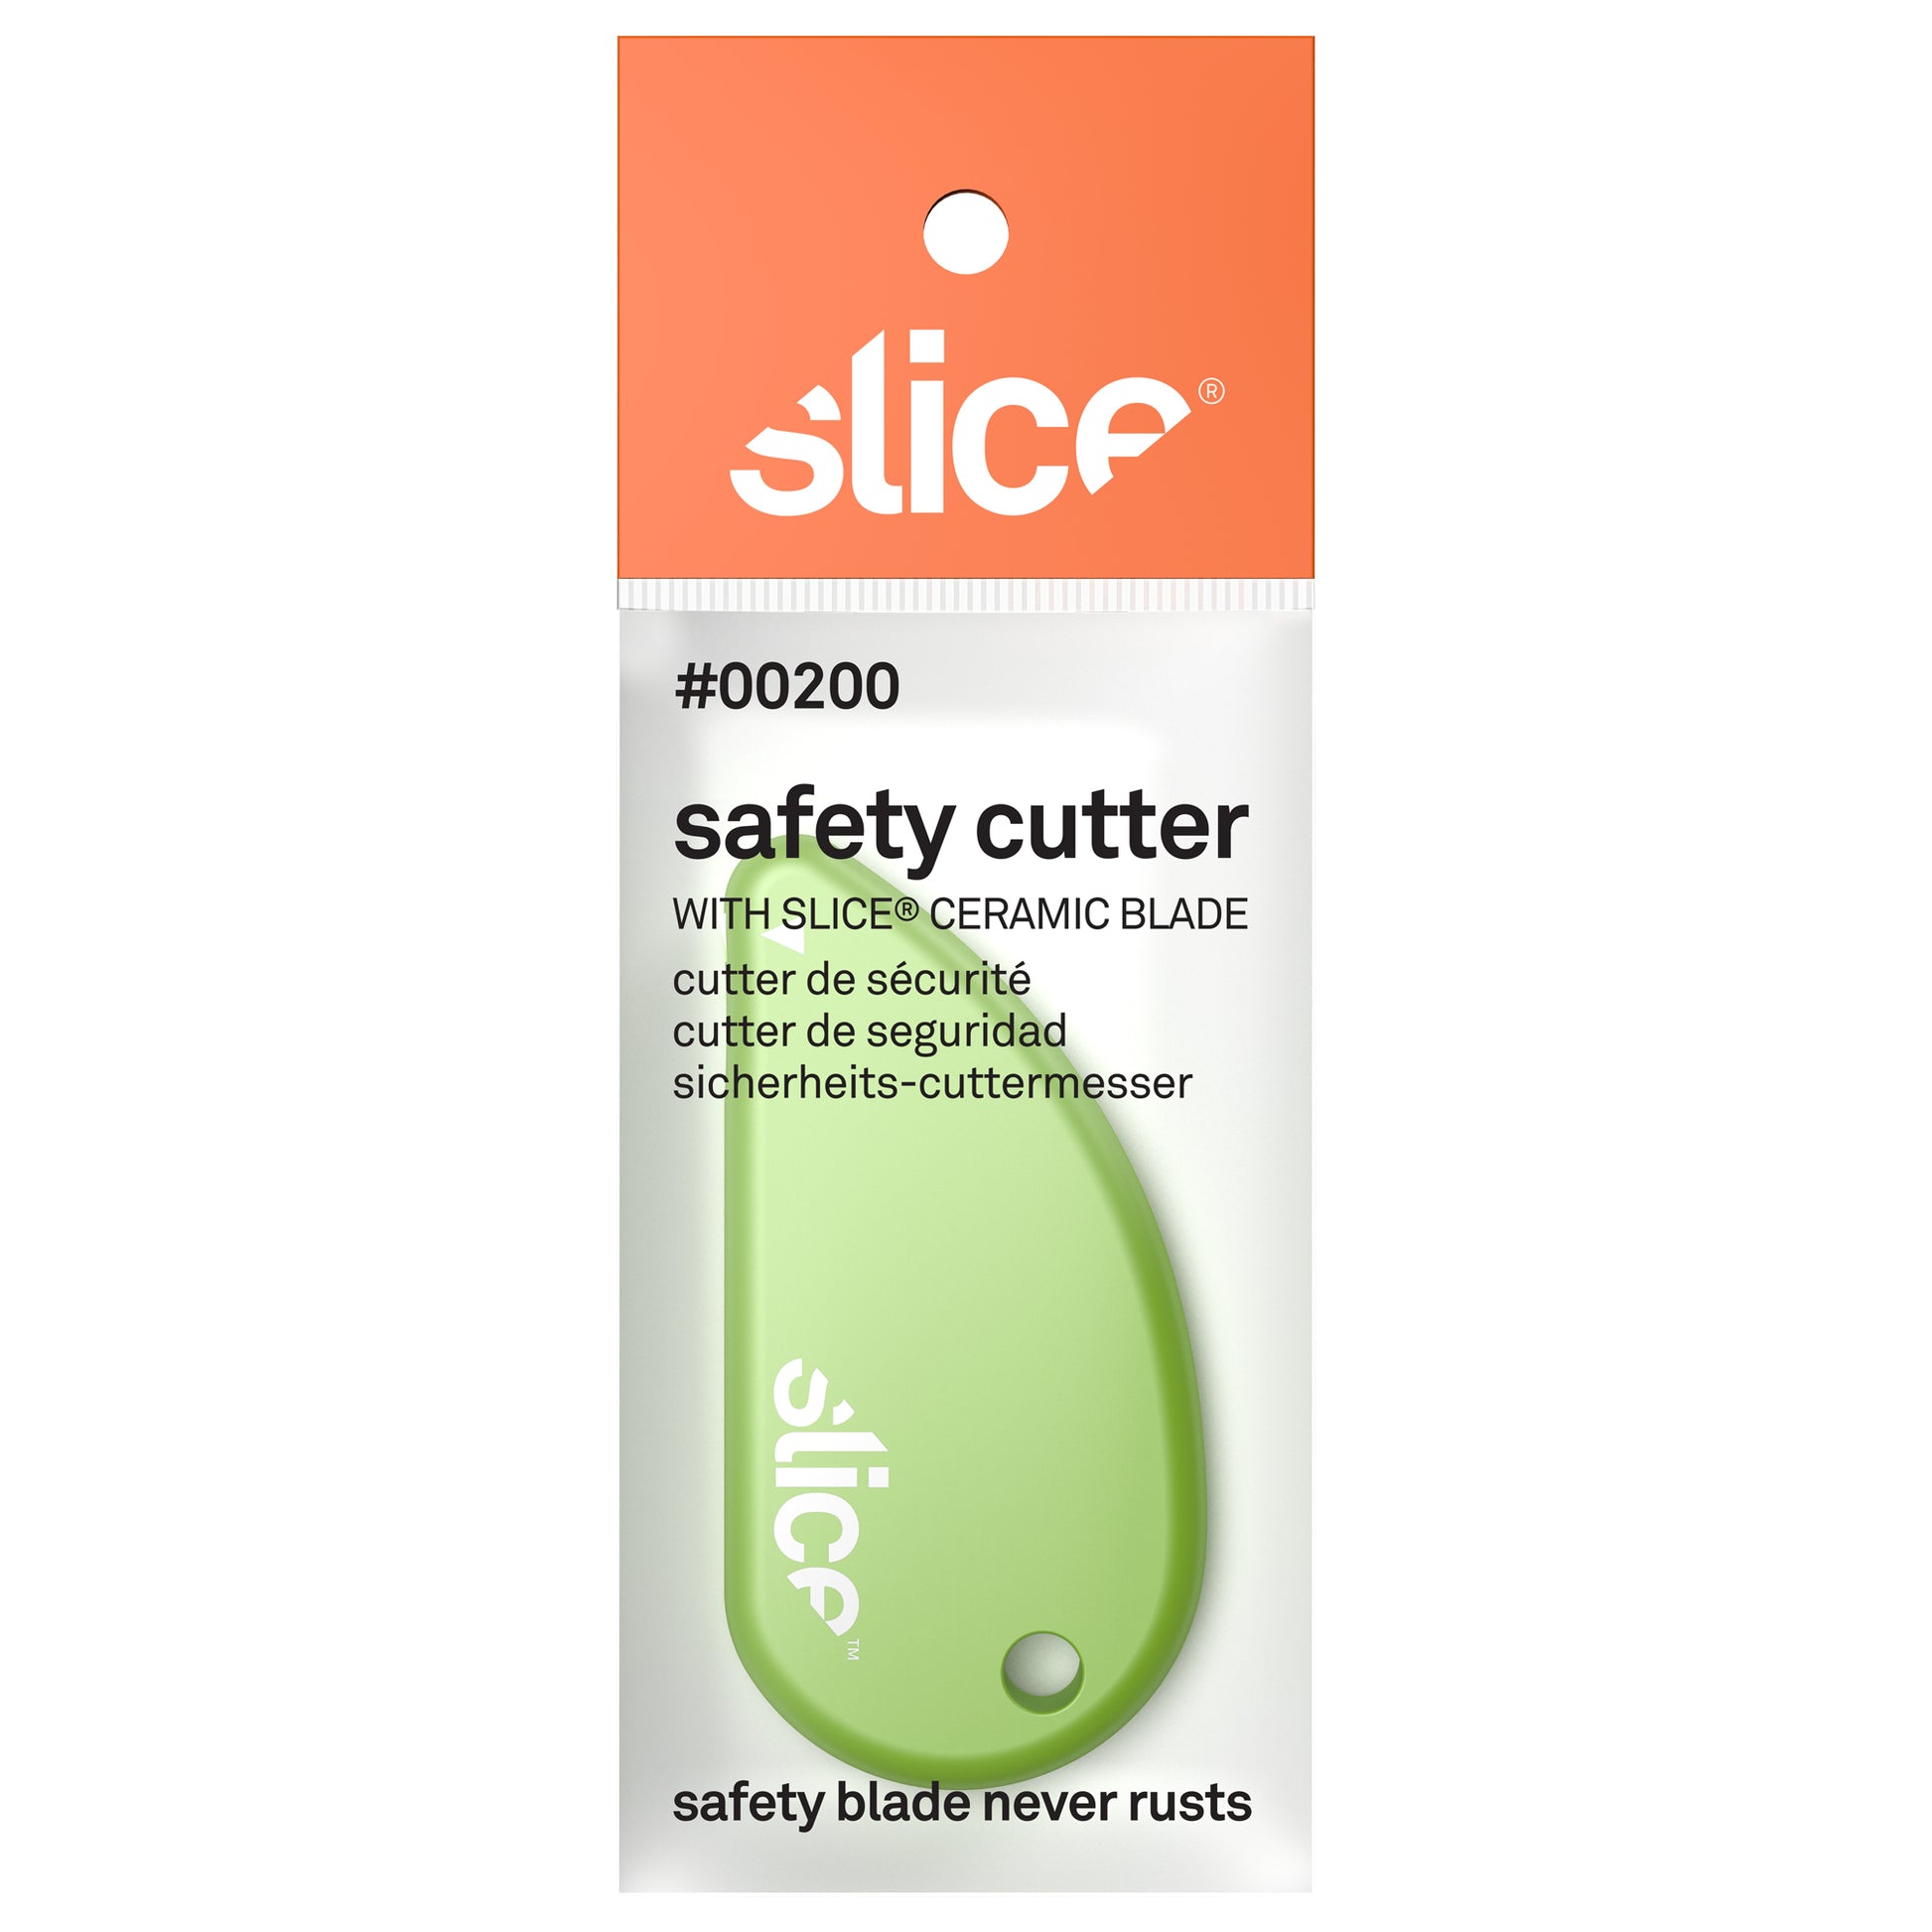 Safety Cutting Tools: If It's Ceramic, It's Slice